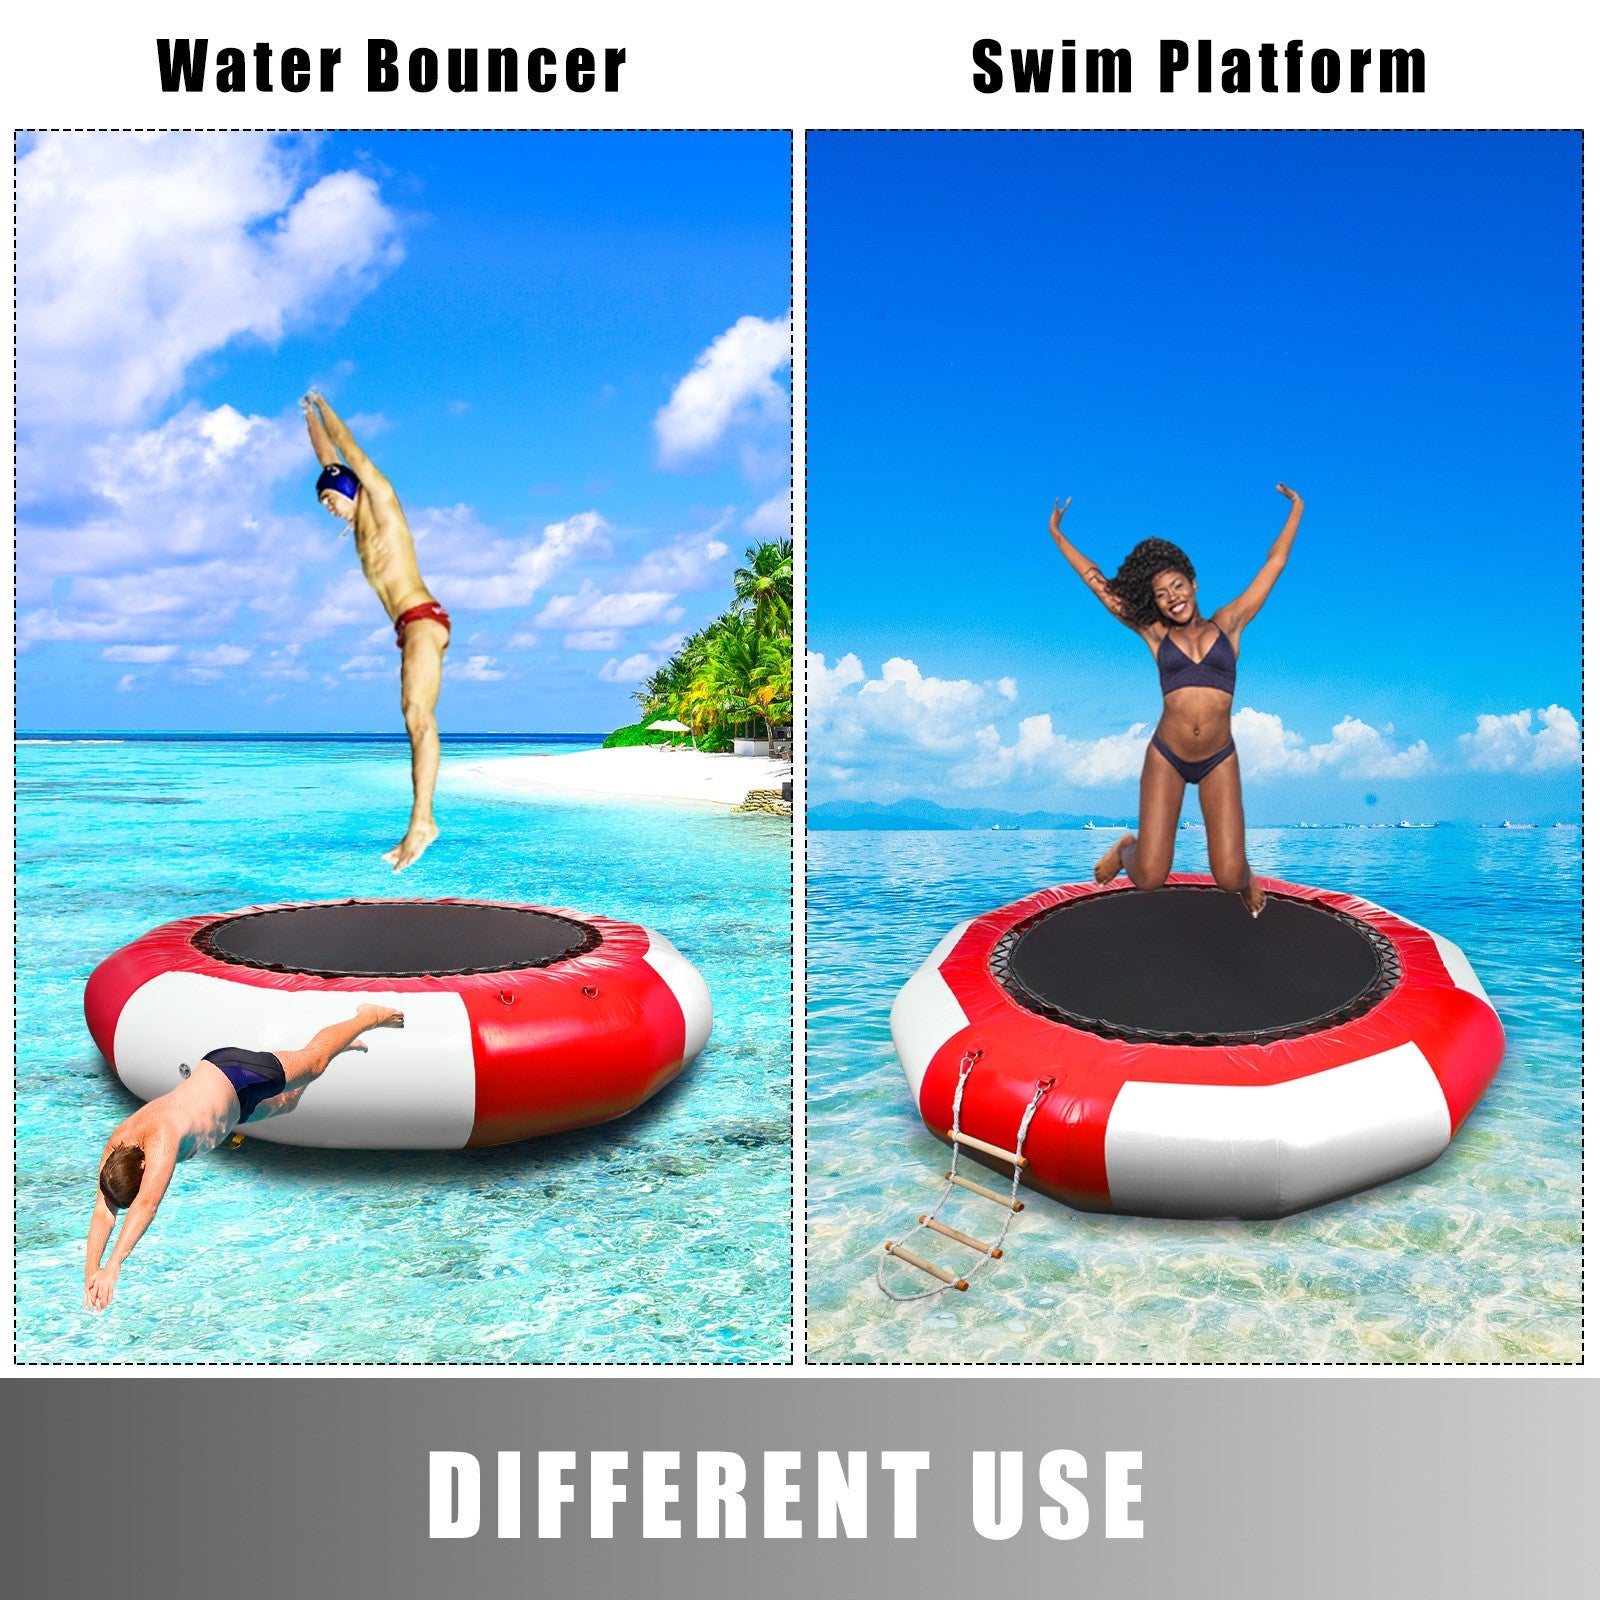 Summerella Bouncie, 6.5Ft Inflatable Trampoline Bounce Swim Platform For Water Sports